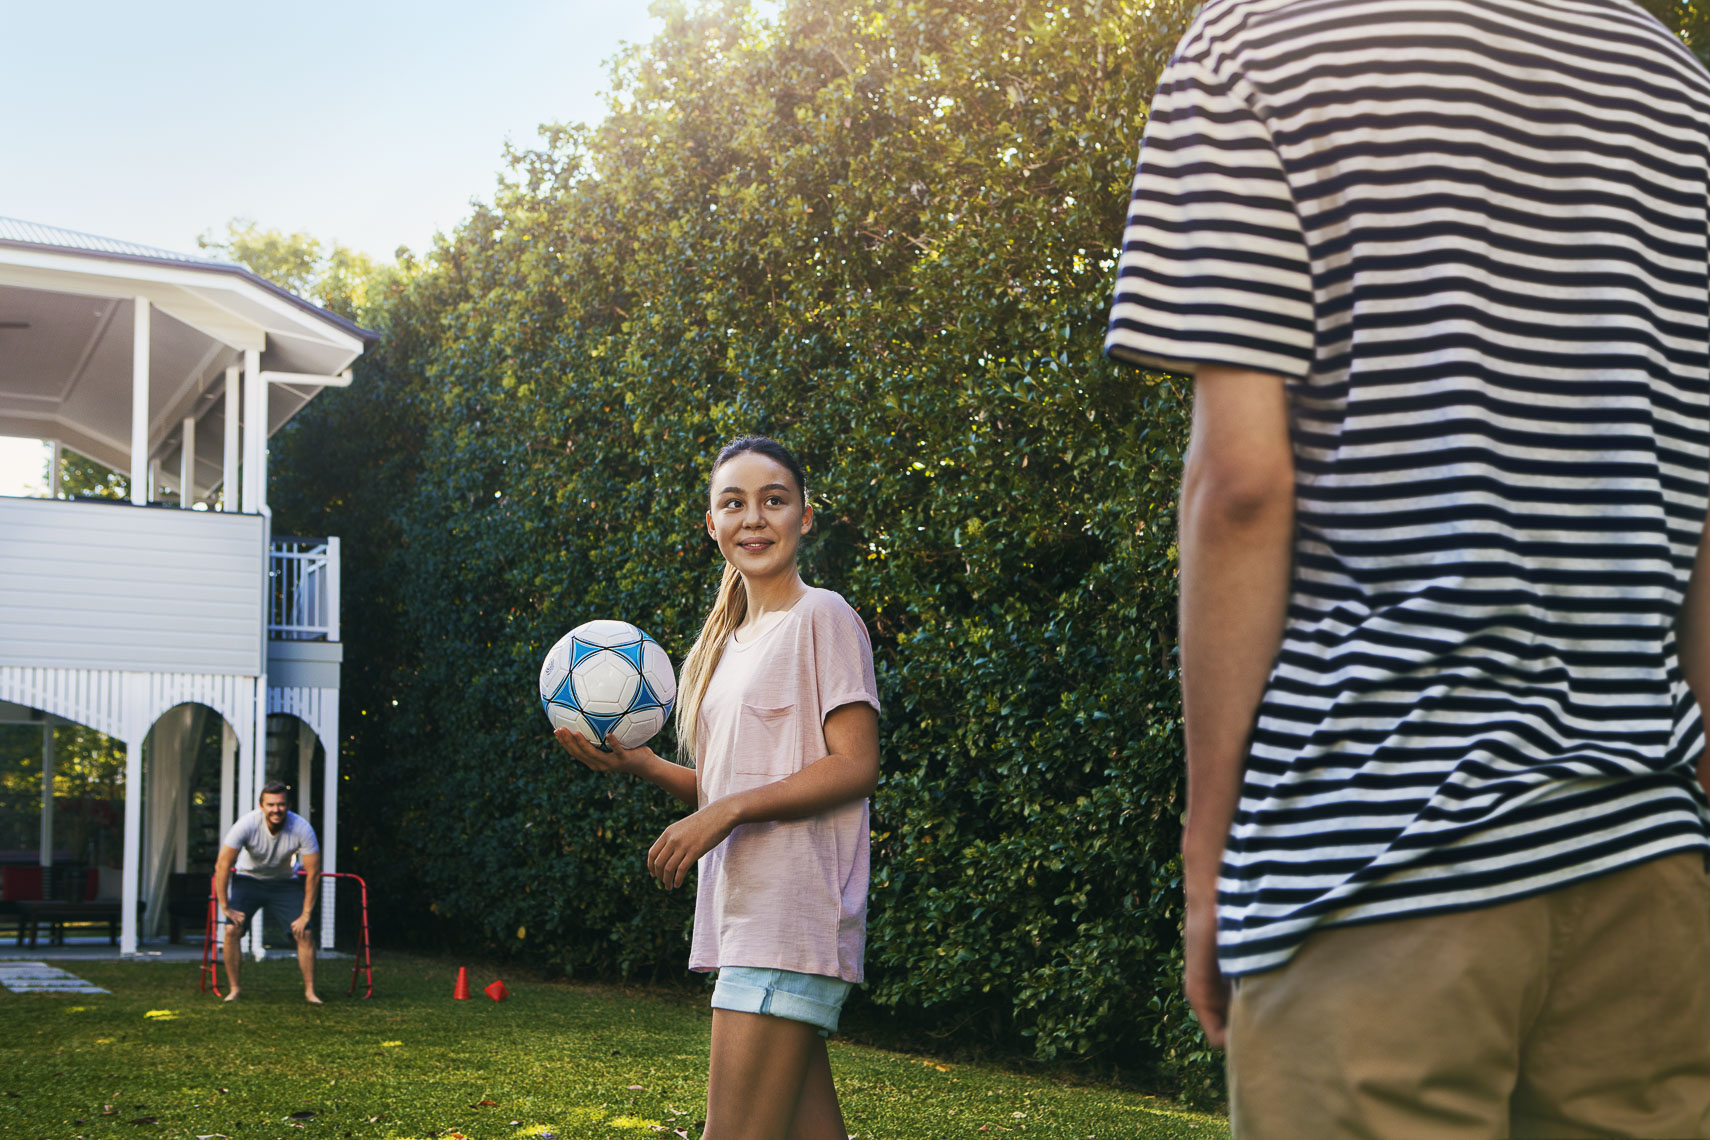 A girl holding a soccer ball in a backyard smiling at her brother